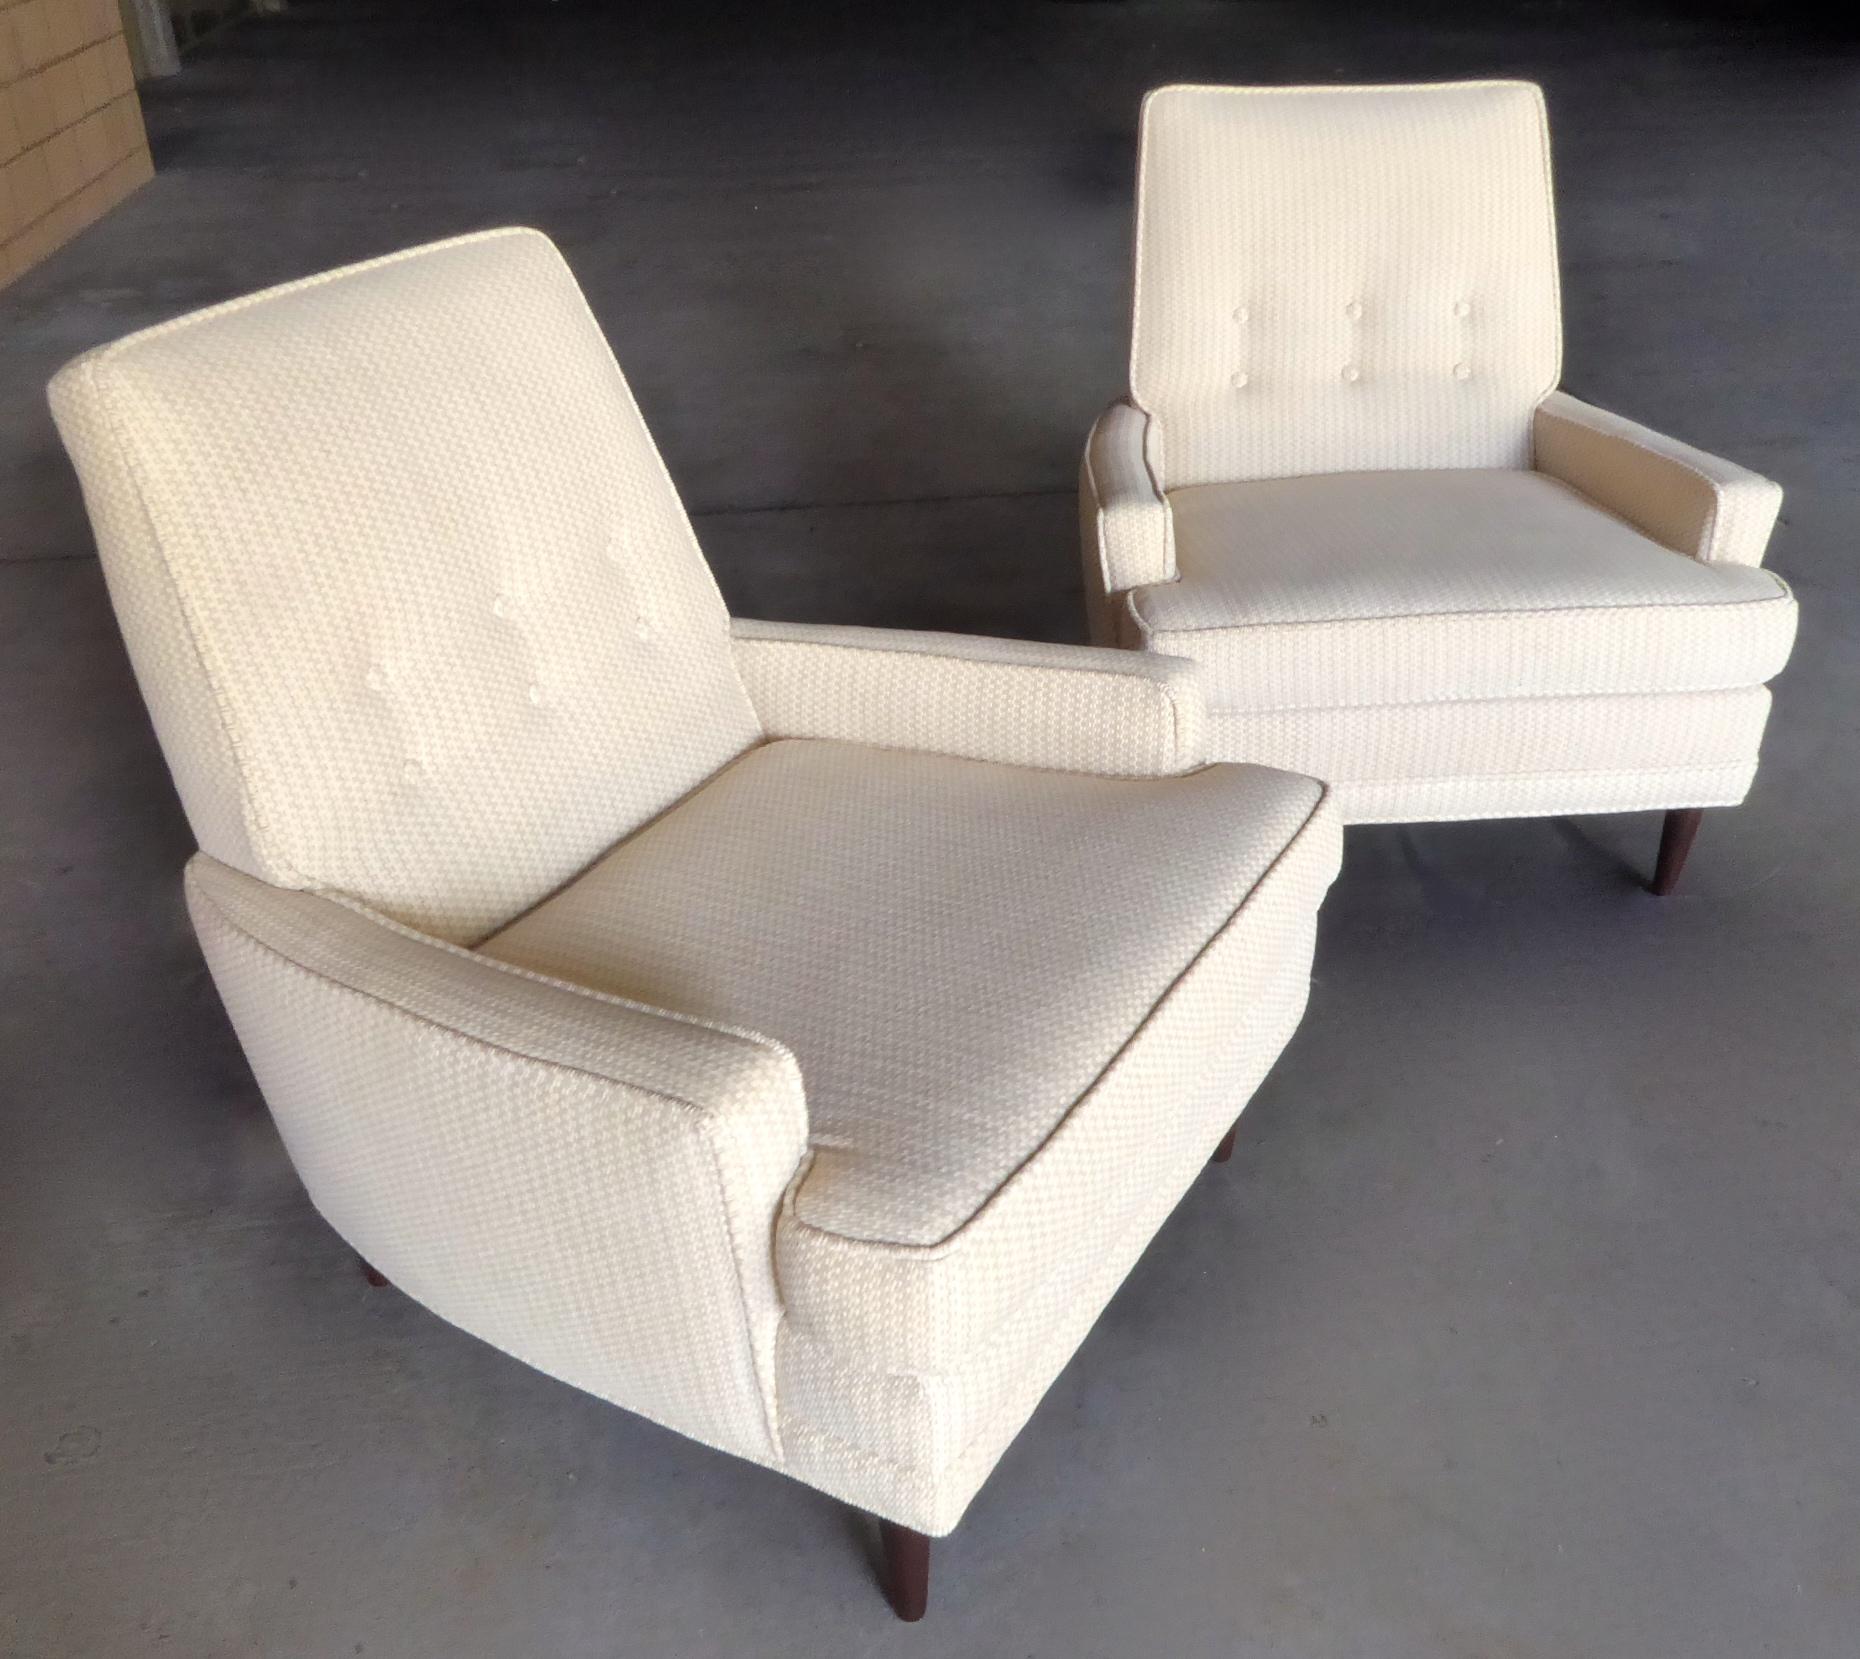 A pair of upholstered armchairs with conical walnut legs, designed by Valentine Seaver and made by the Kroehler Manufacturing Company, circa 1960. An original label is present which identifies the designer and date of order (1-21-60).
The chairs